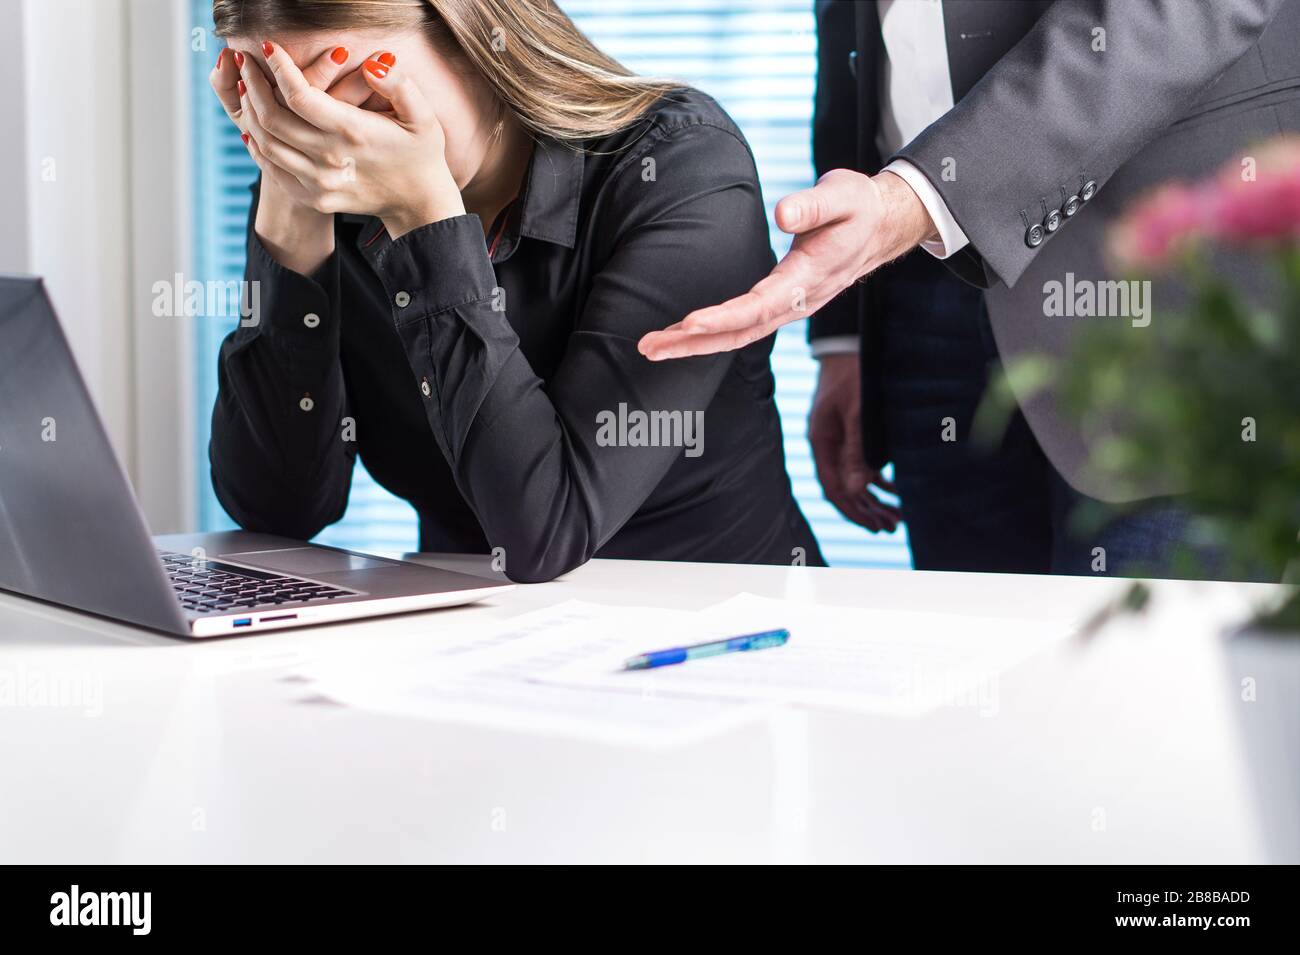 Upset woman crying in office. Getting fired from job. Business man or boss apologizing, comforting or supporting assistant. Stock Photo